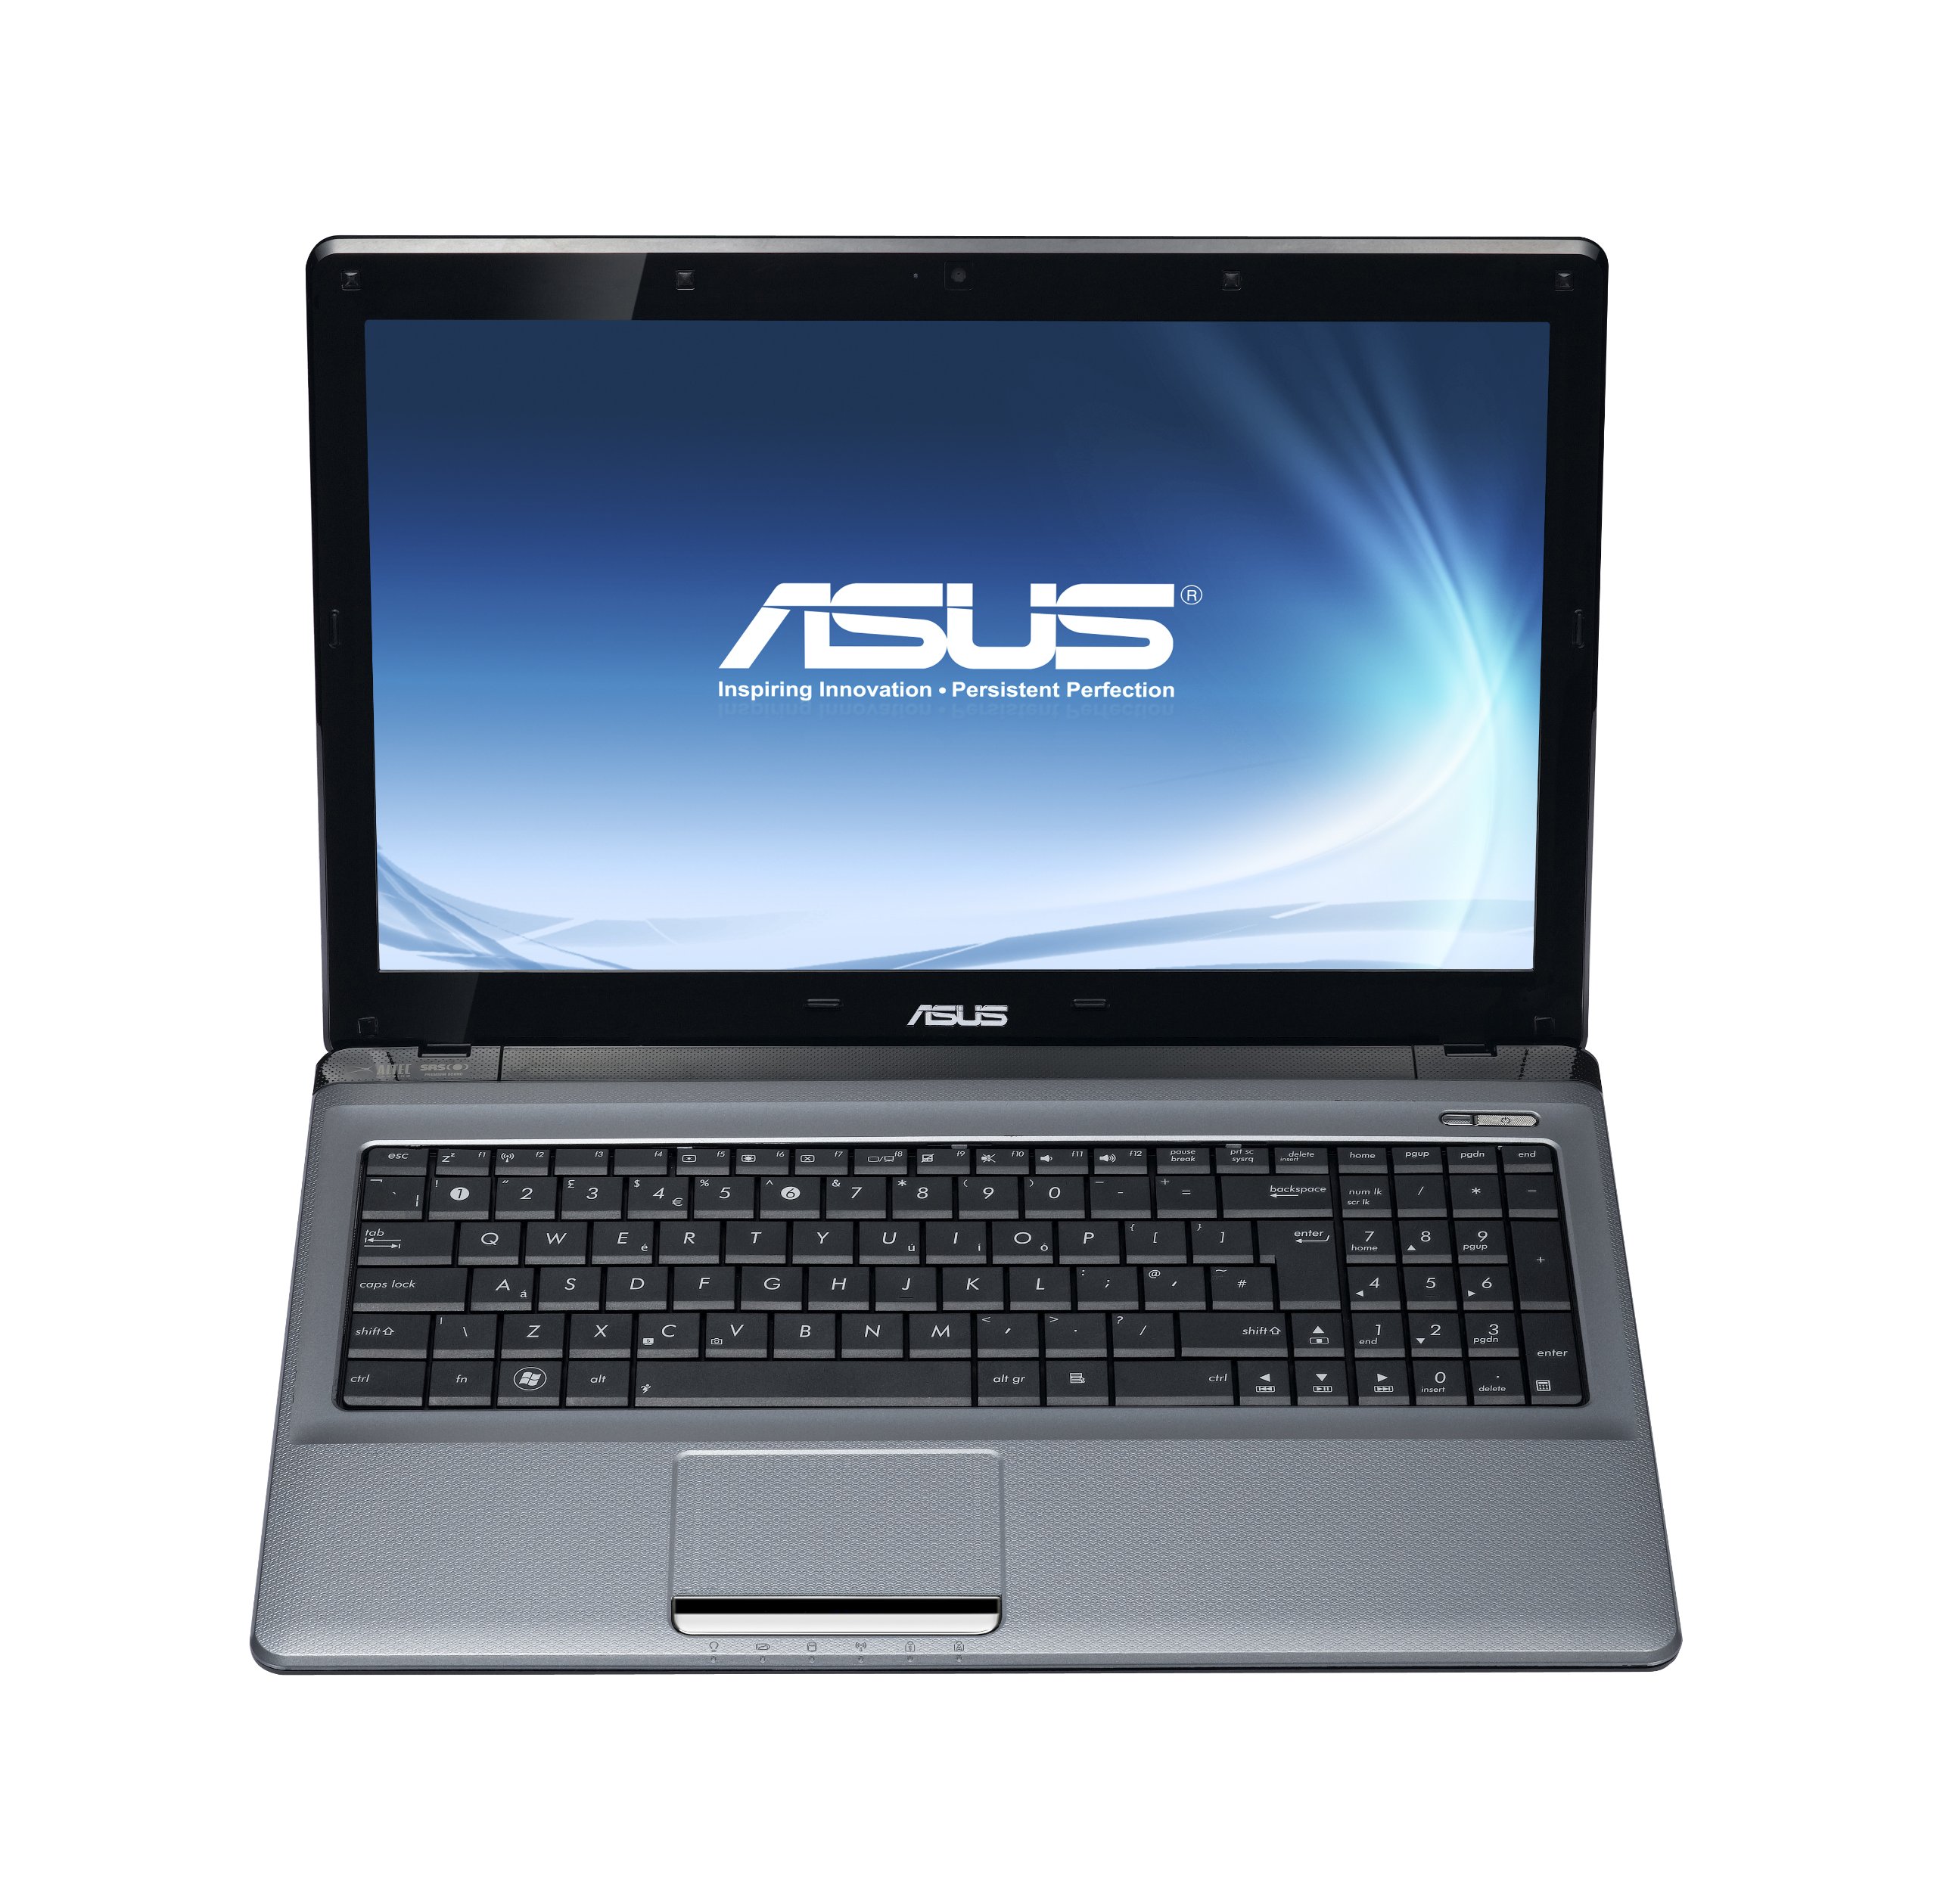 Asus A93SV 4 slot Notebook